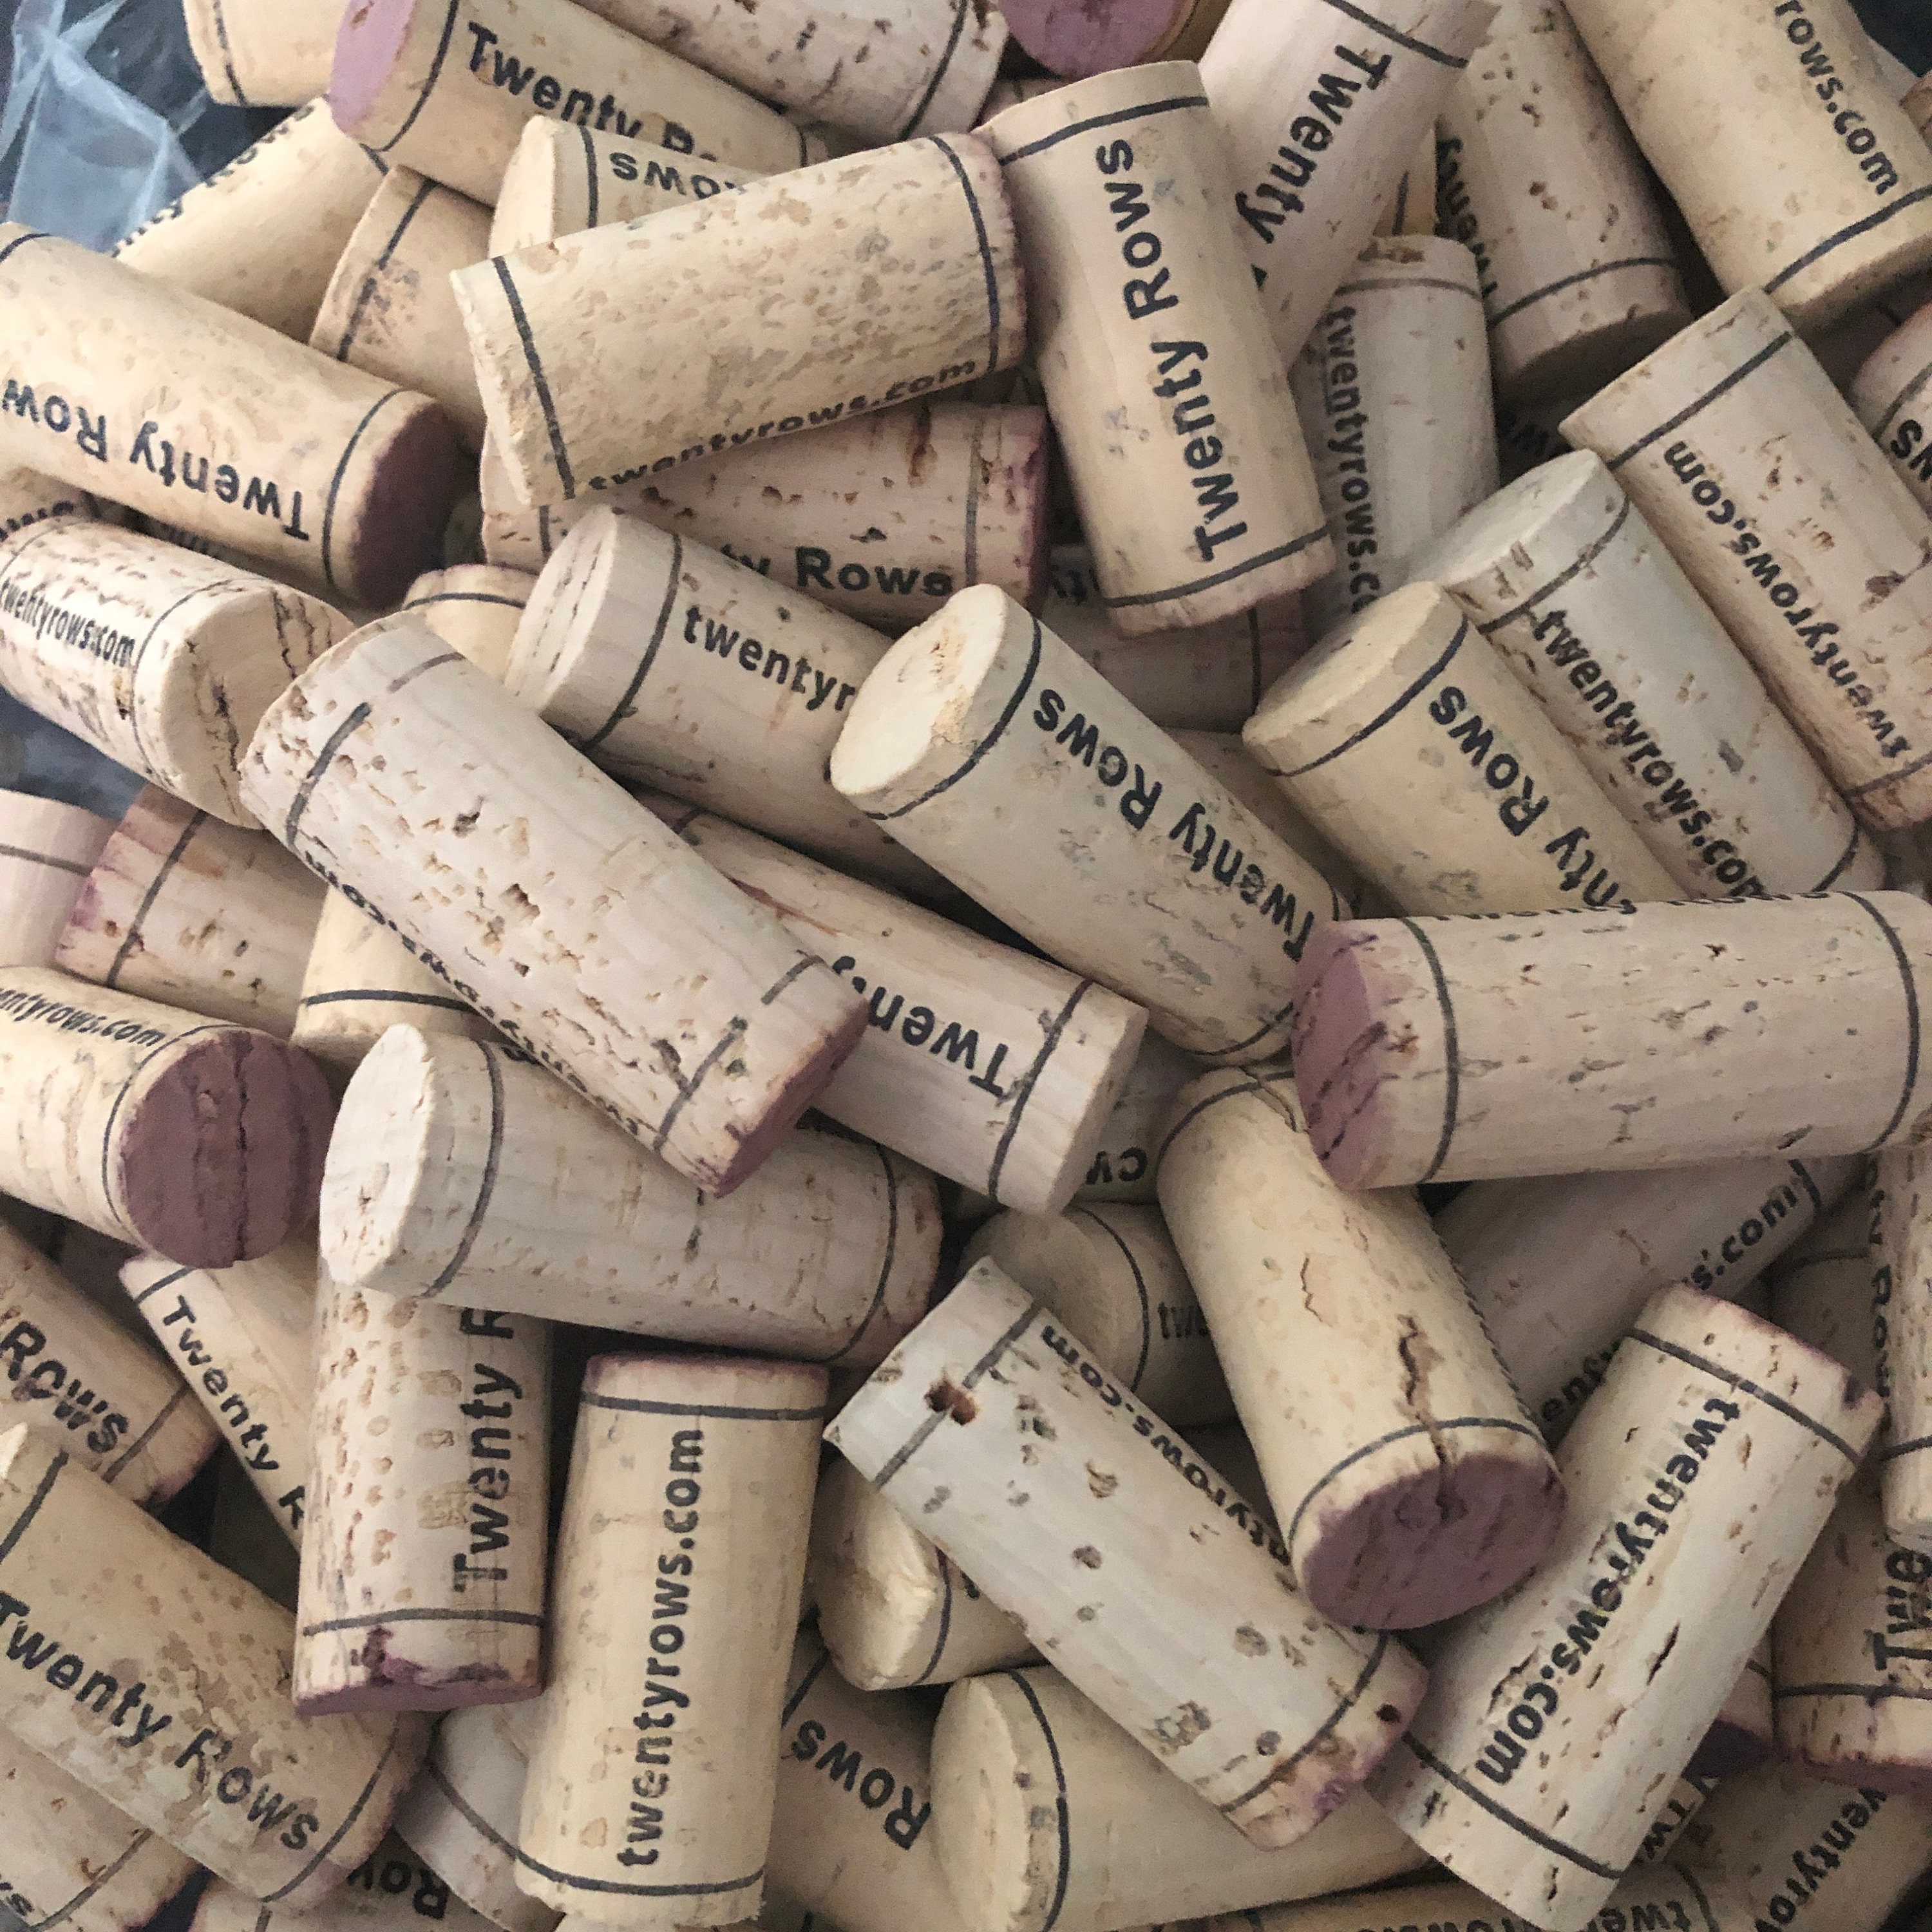 20 Champagne Corks Upcycle Projects Arts Crafts Decor Wedding Accents  Assorted